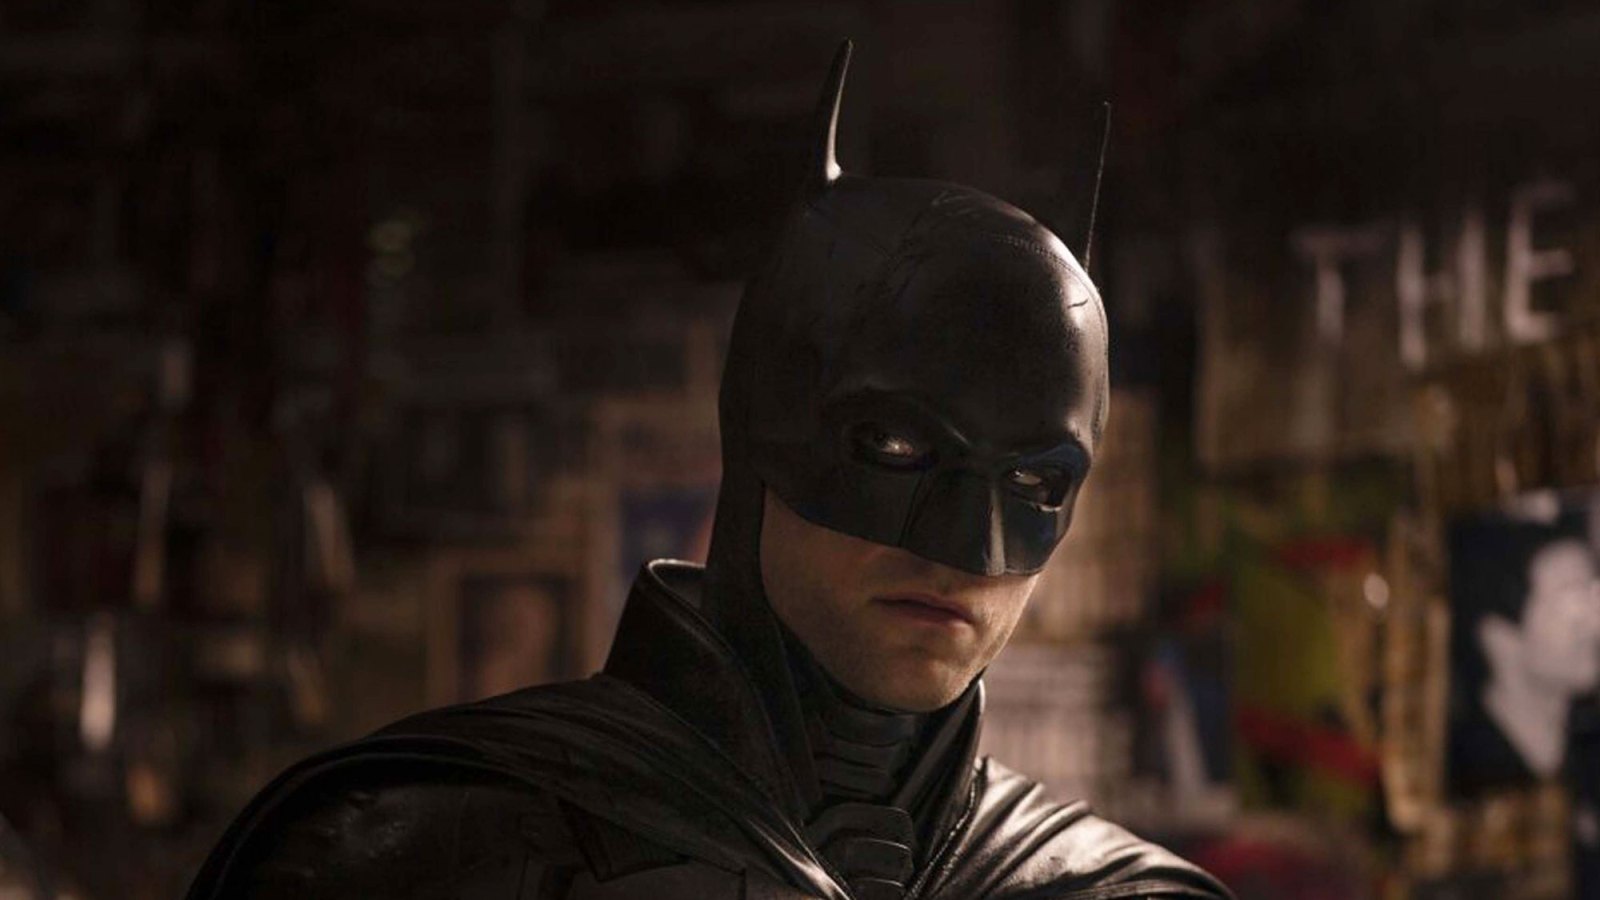 How to Watch All of the 'Batman' Movies in Order